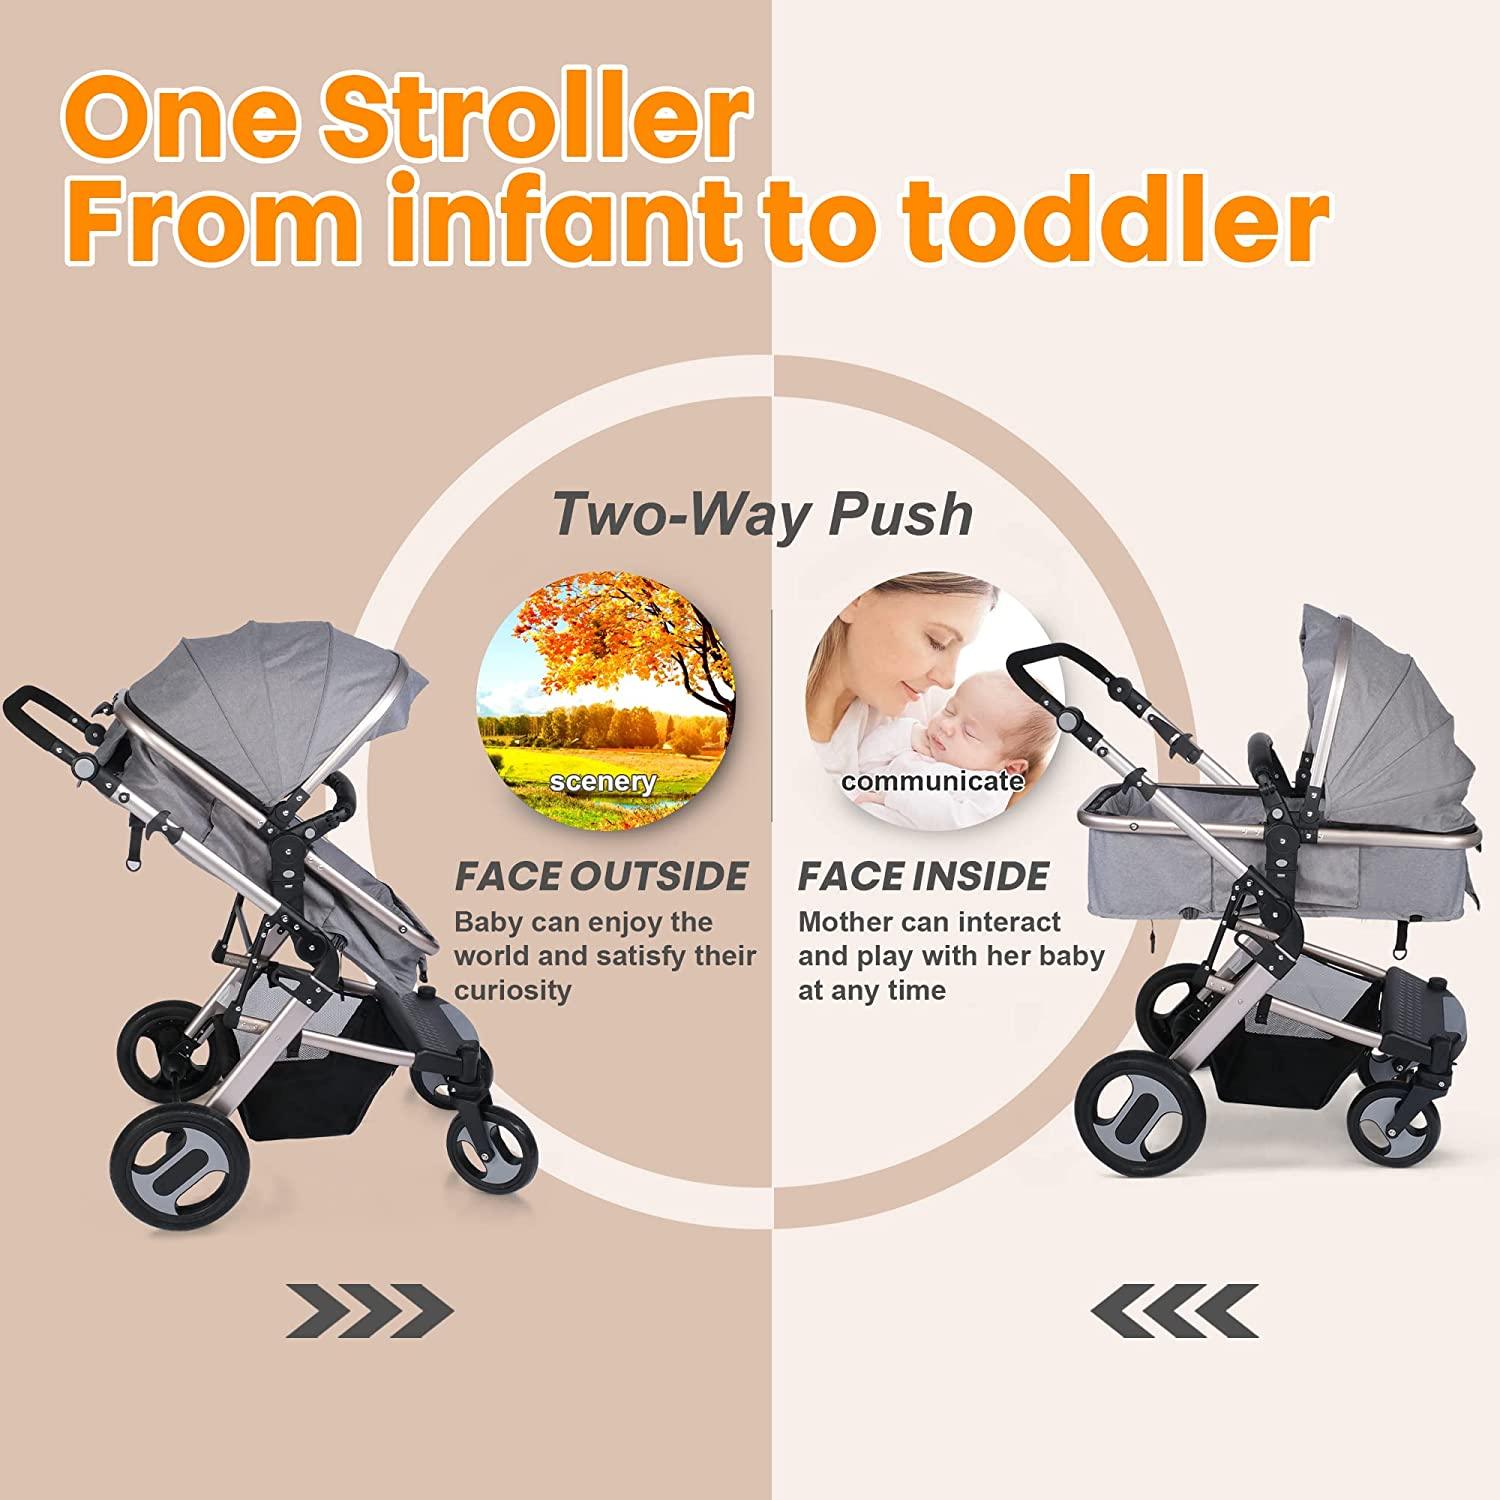 2 in 1 Convertible Baby Stroller for Newborn, Toddler - High Landscape Infant Carriage, Foldable Aluminum Alloy Pushchair, Grey - Bosonshop